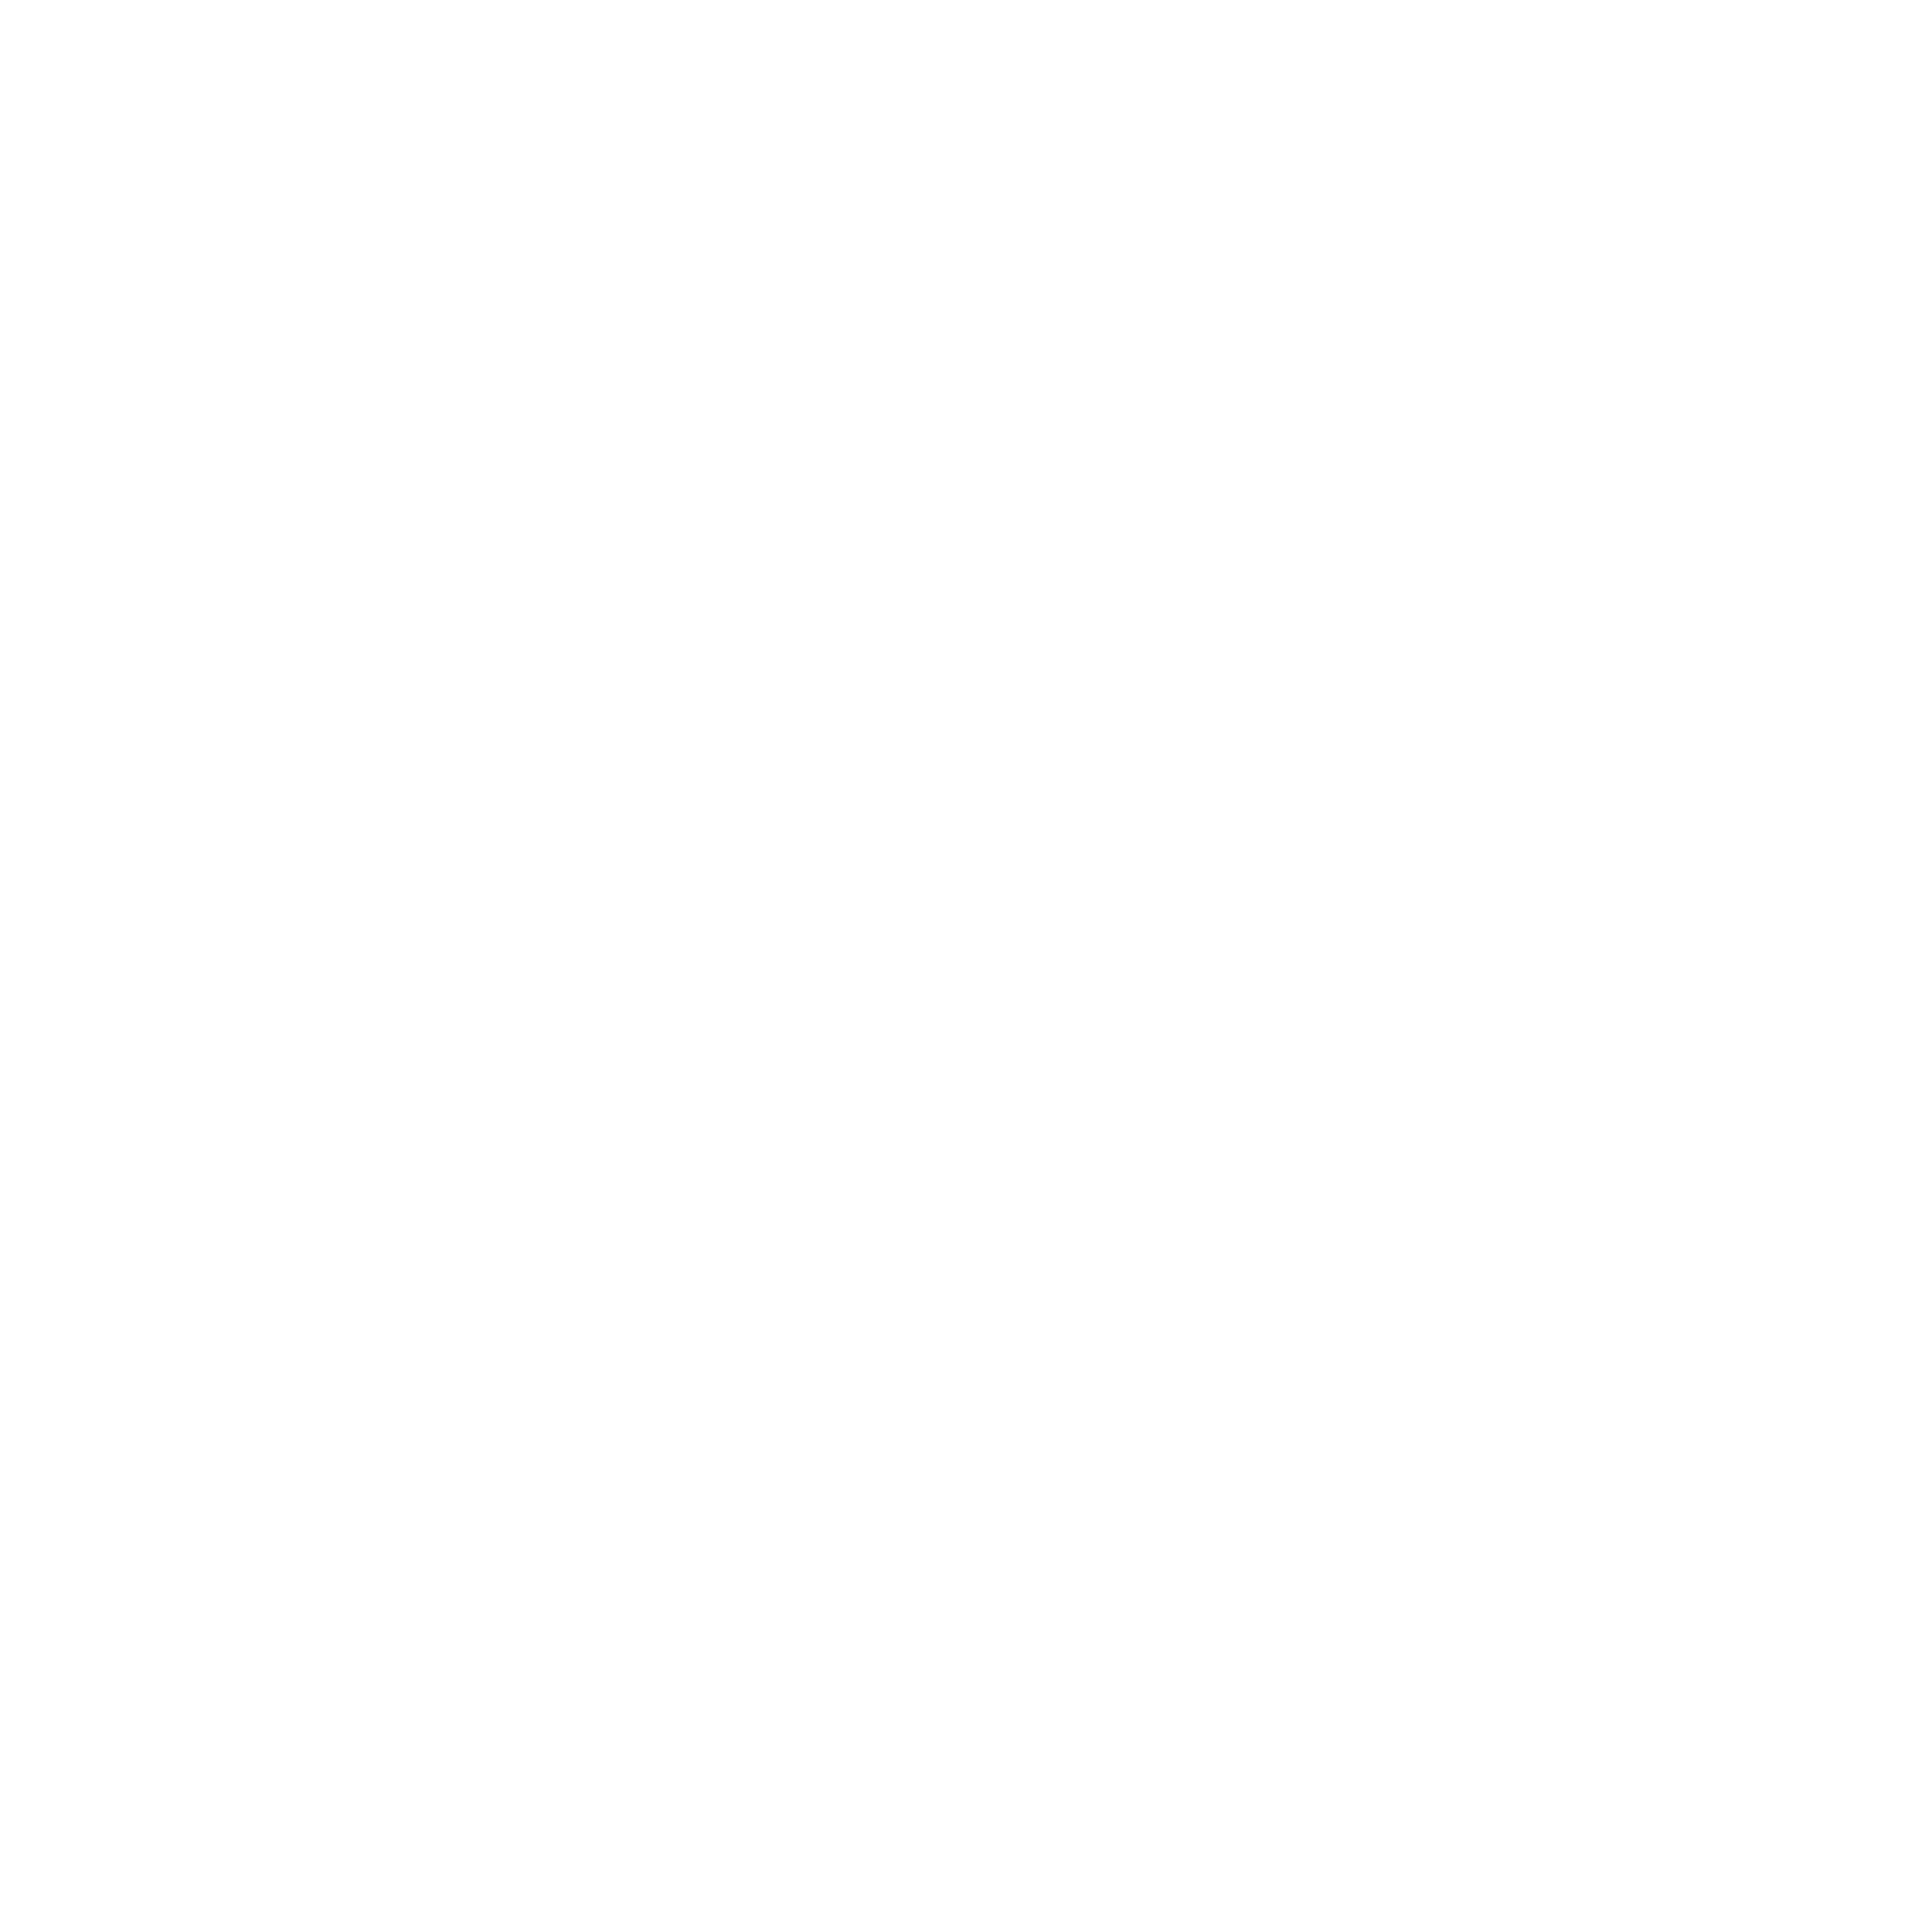 Cello logo in white with transparent background